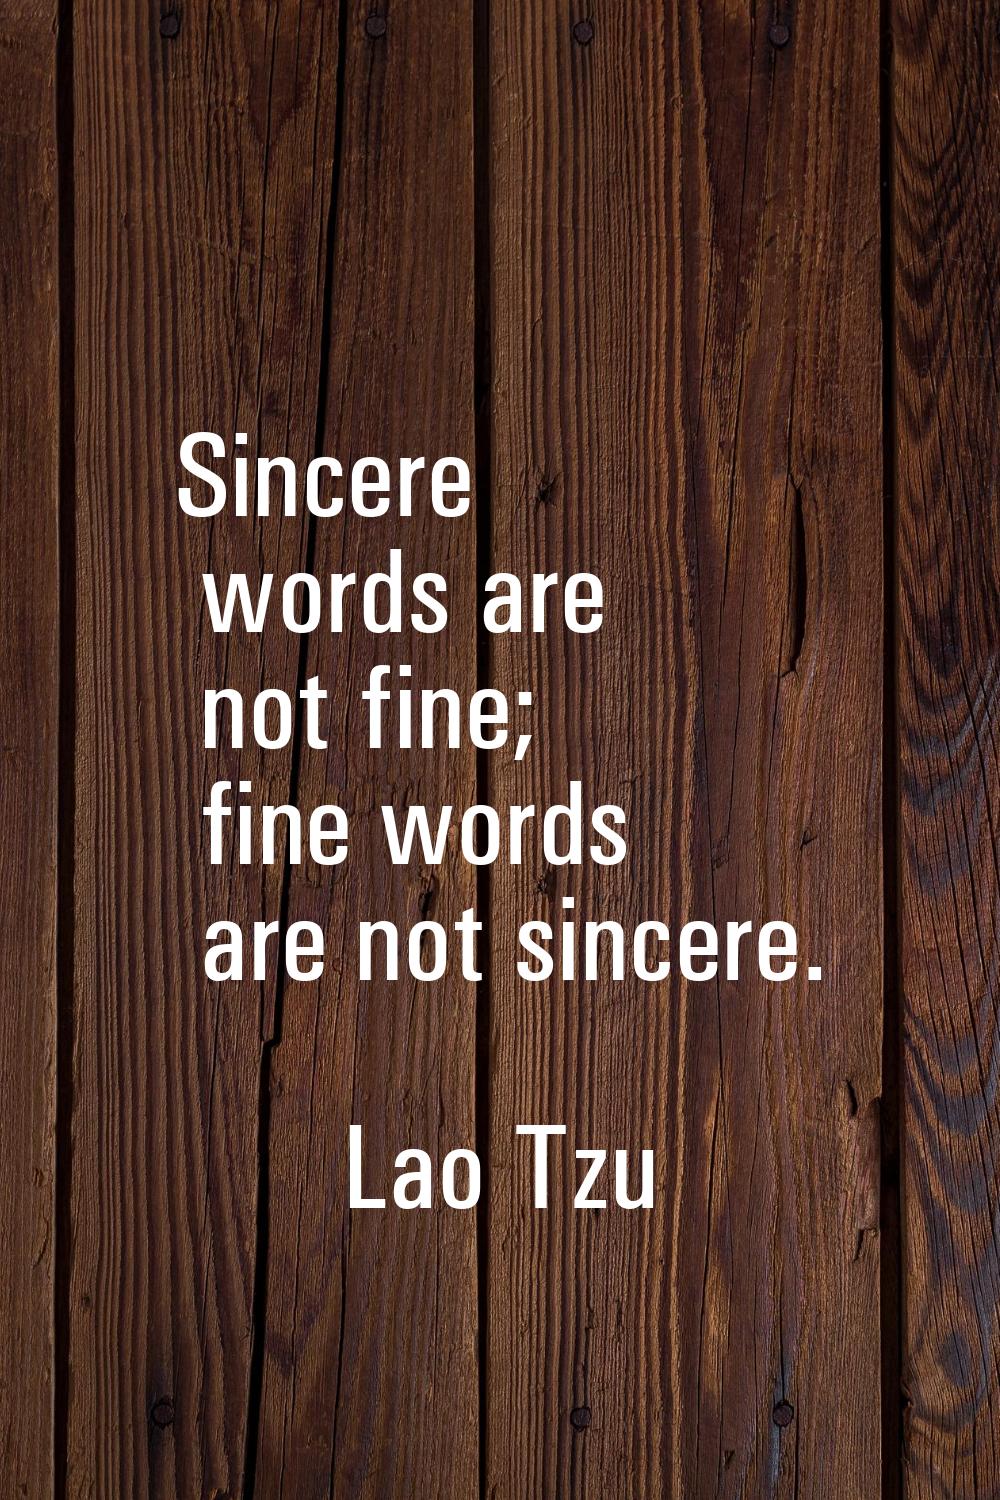 Sincere words are not fine; fine words are not sincere.